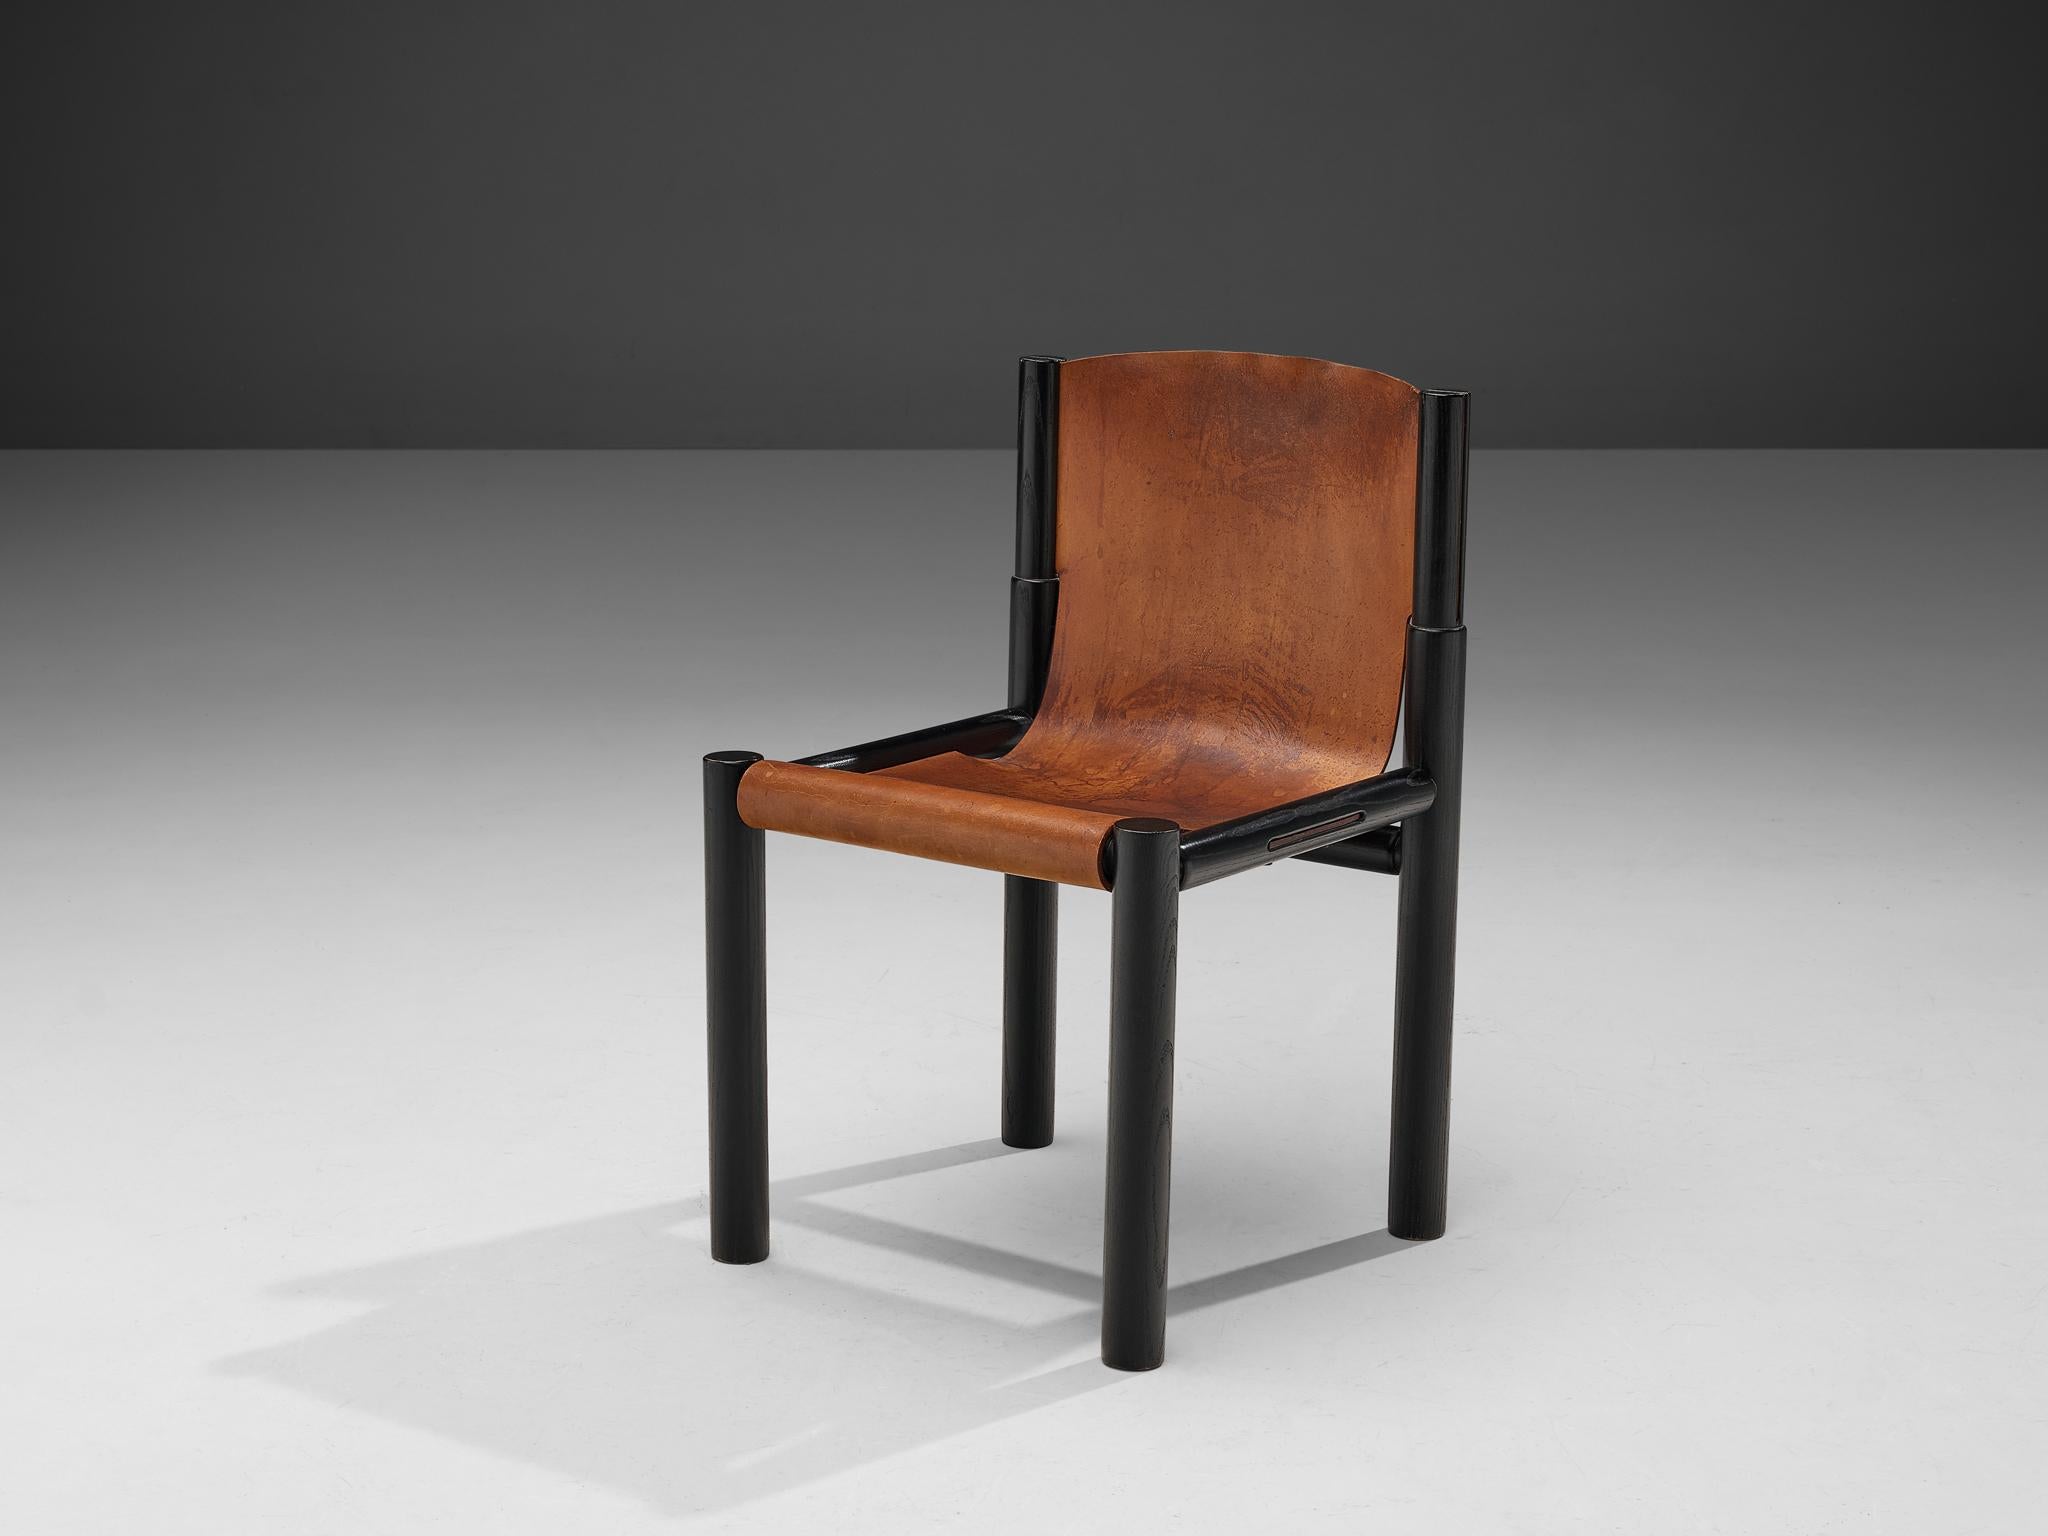 Pia Manu, chair, cognac leather, ebonized wood, Belgium, 1970s 

This wonderful chair features a geometric, sturdy black painted wooden frame. The frame shows great, subtle details. The seat is executed with fine cognac leather that has patinated